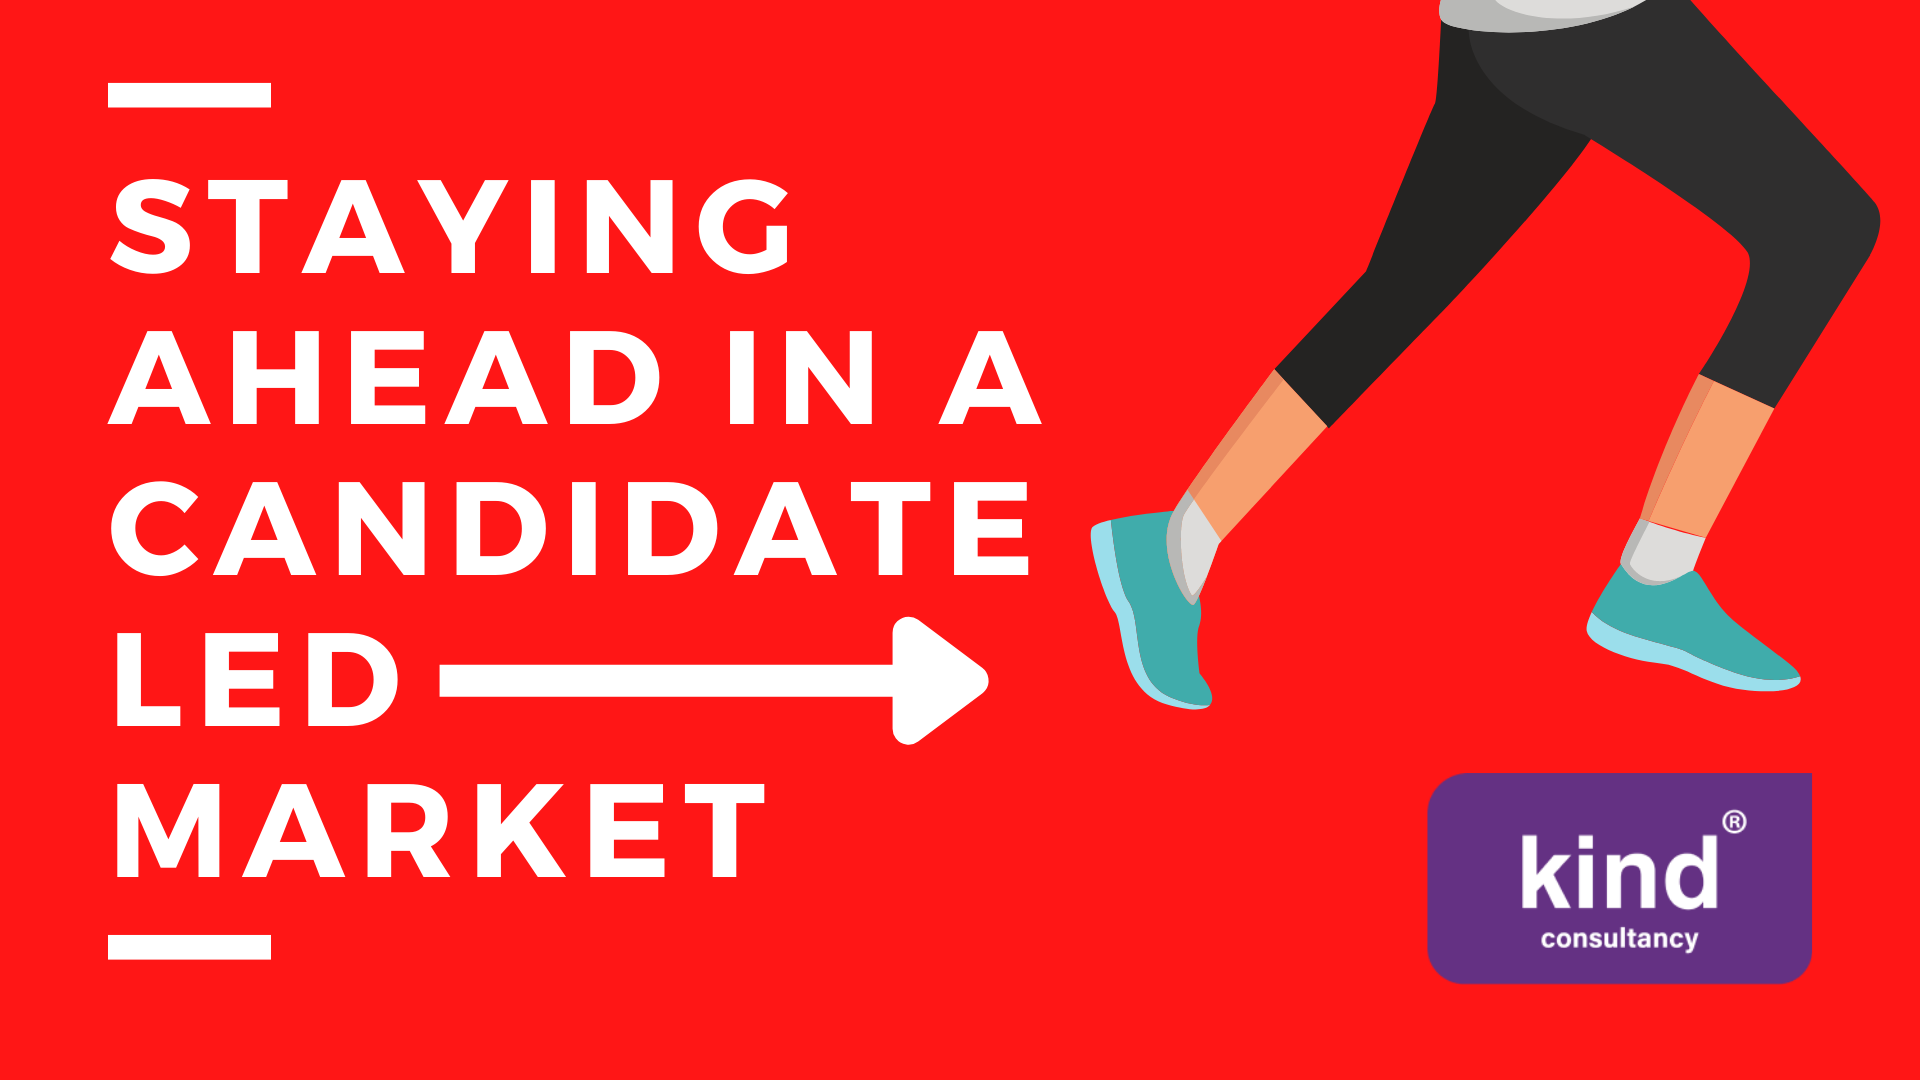 Staying ahead in a candidate led market